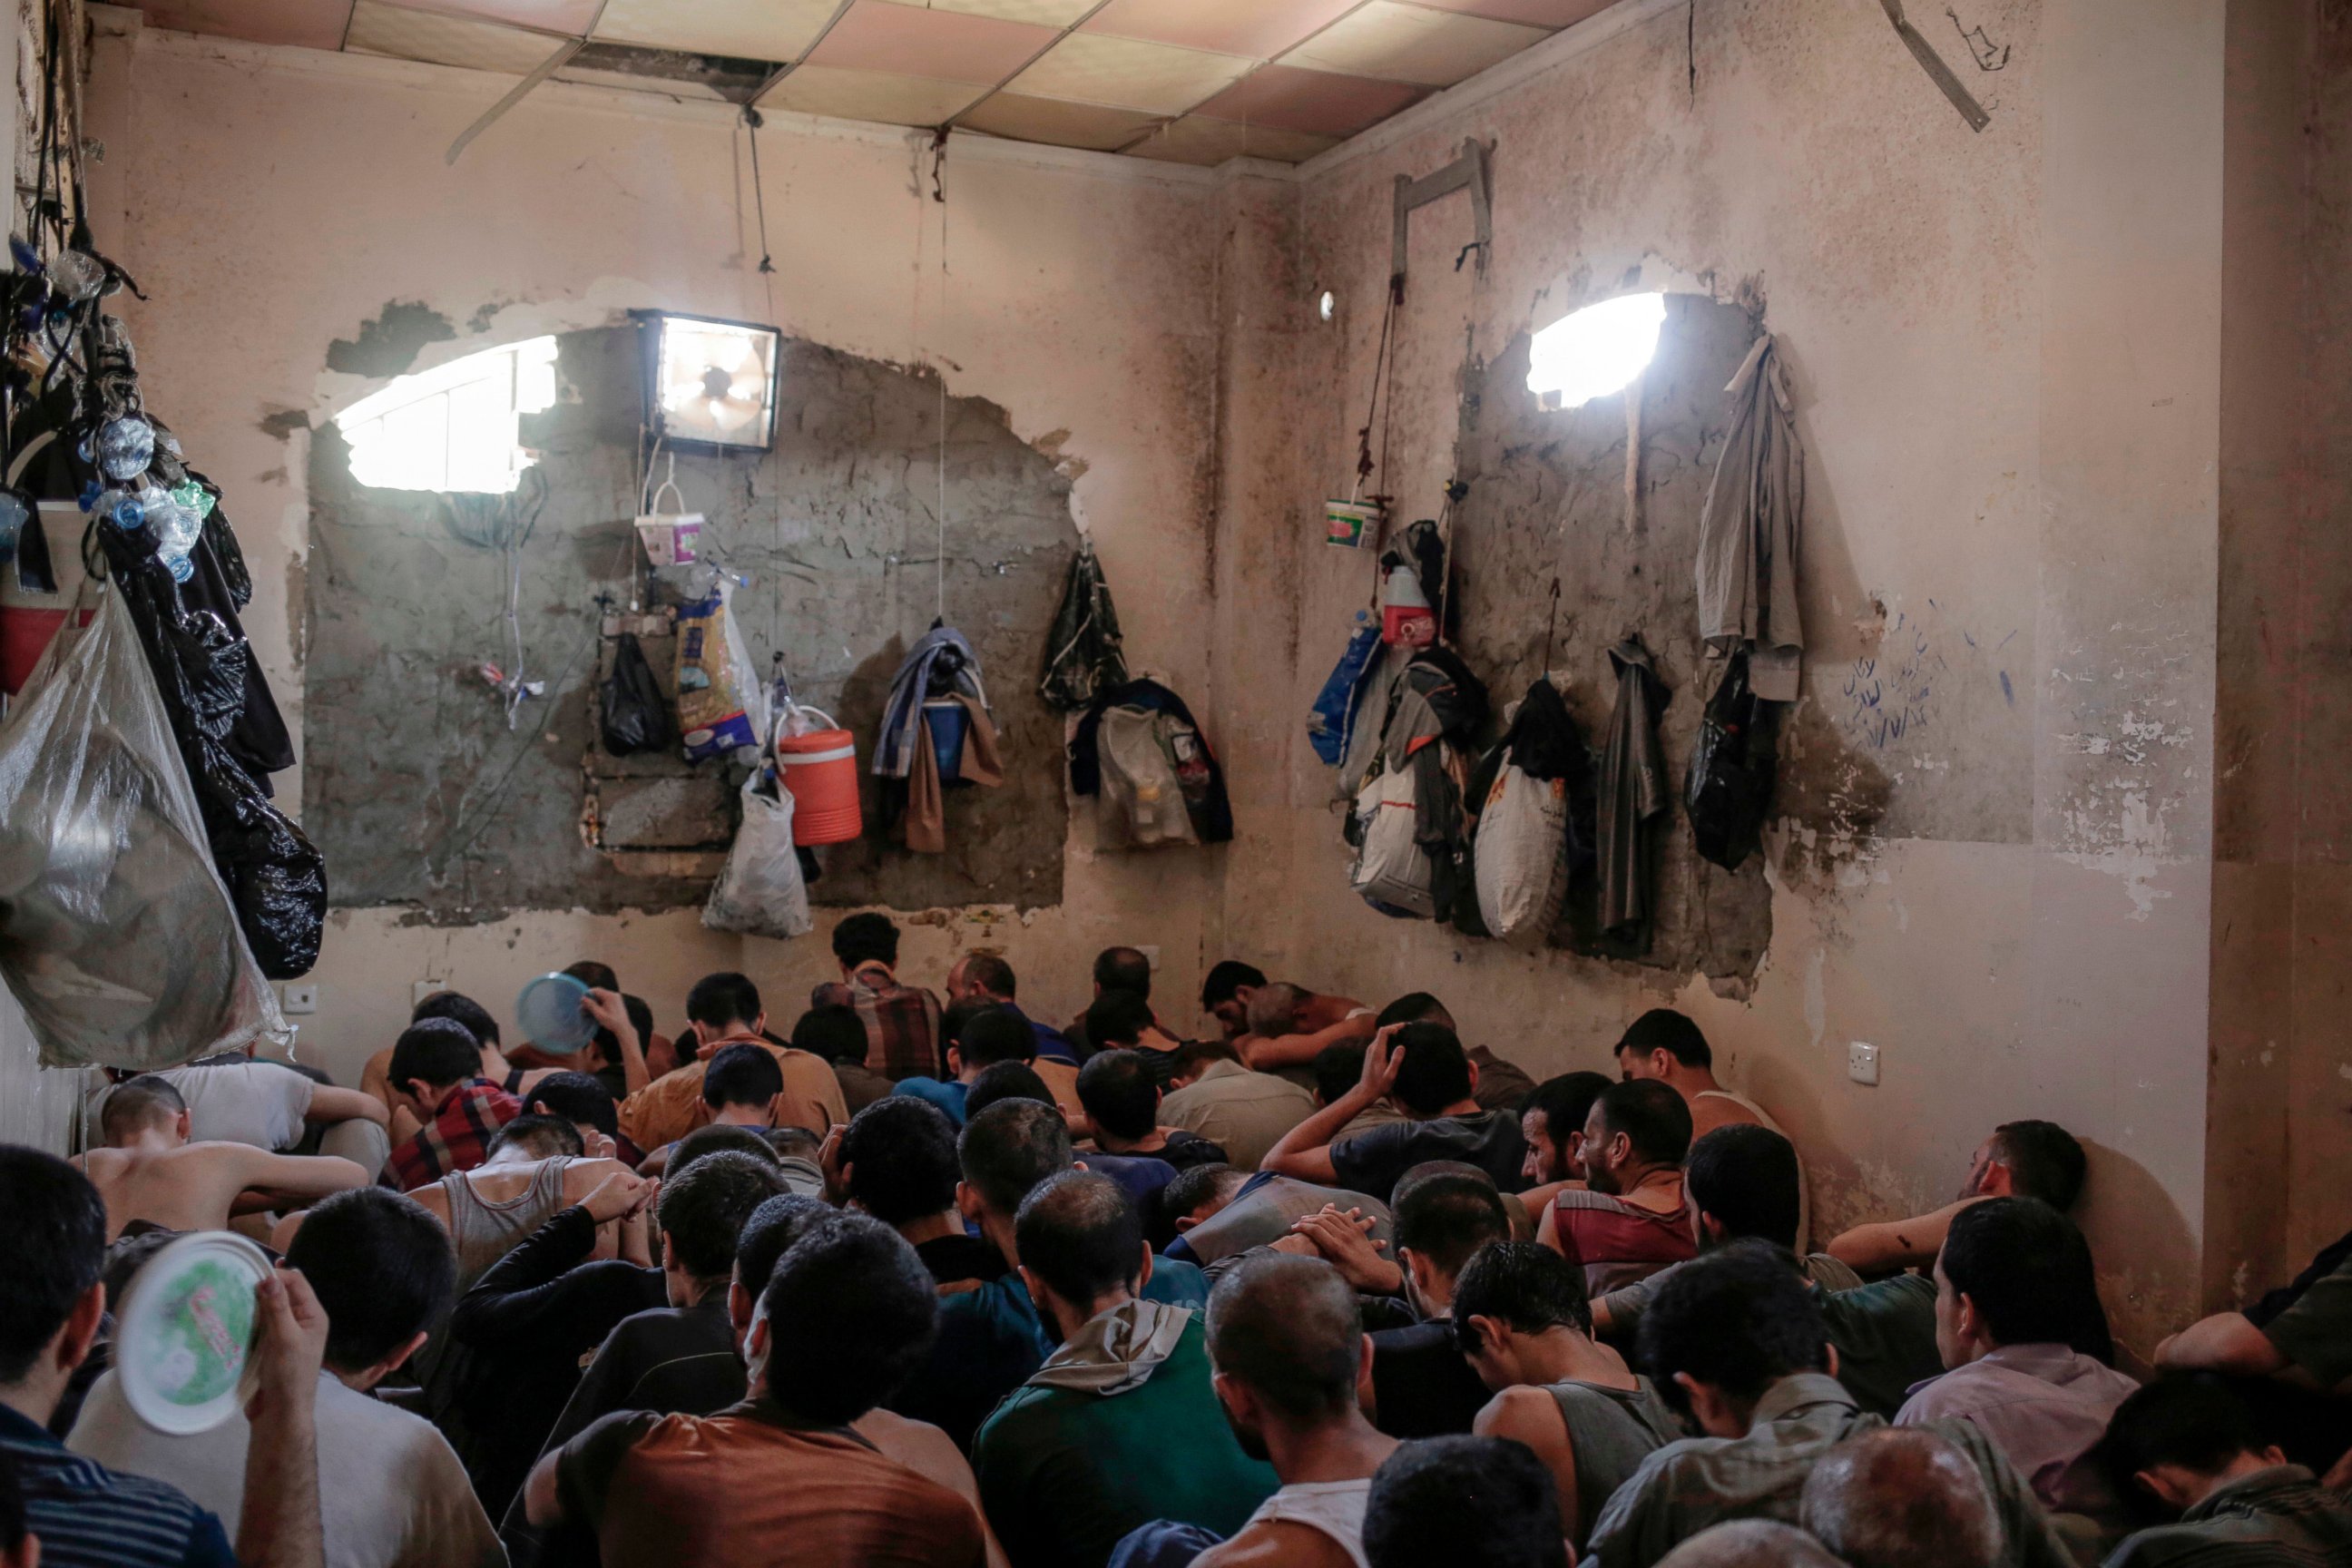 PHOTO: In this Tuesday, July 18, 2017 file photo, Suspected Islamic State members sit inside a small room in a prison south of Mosul, Iraq.